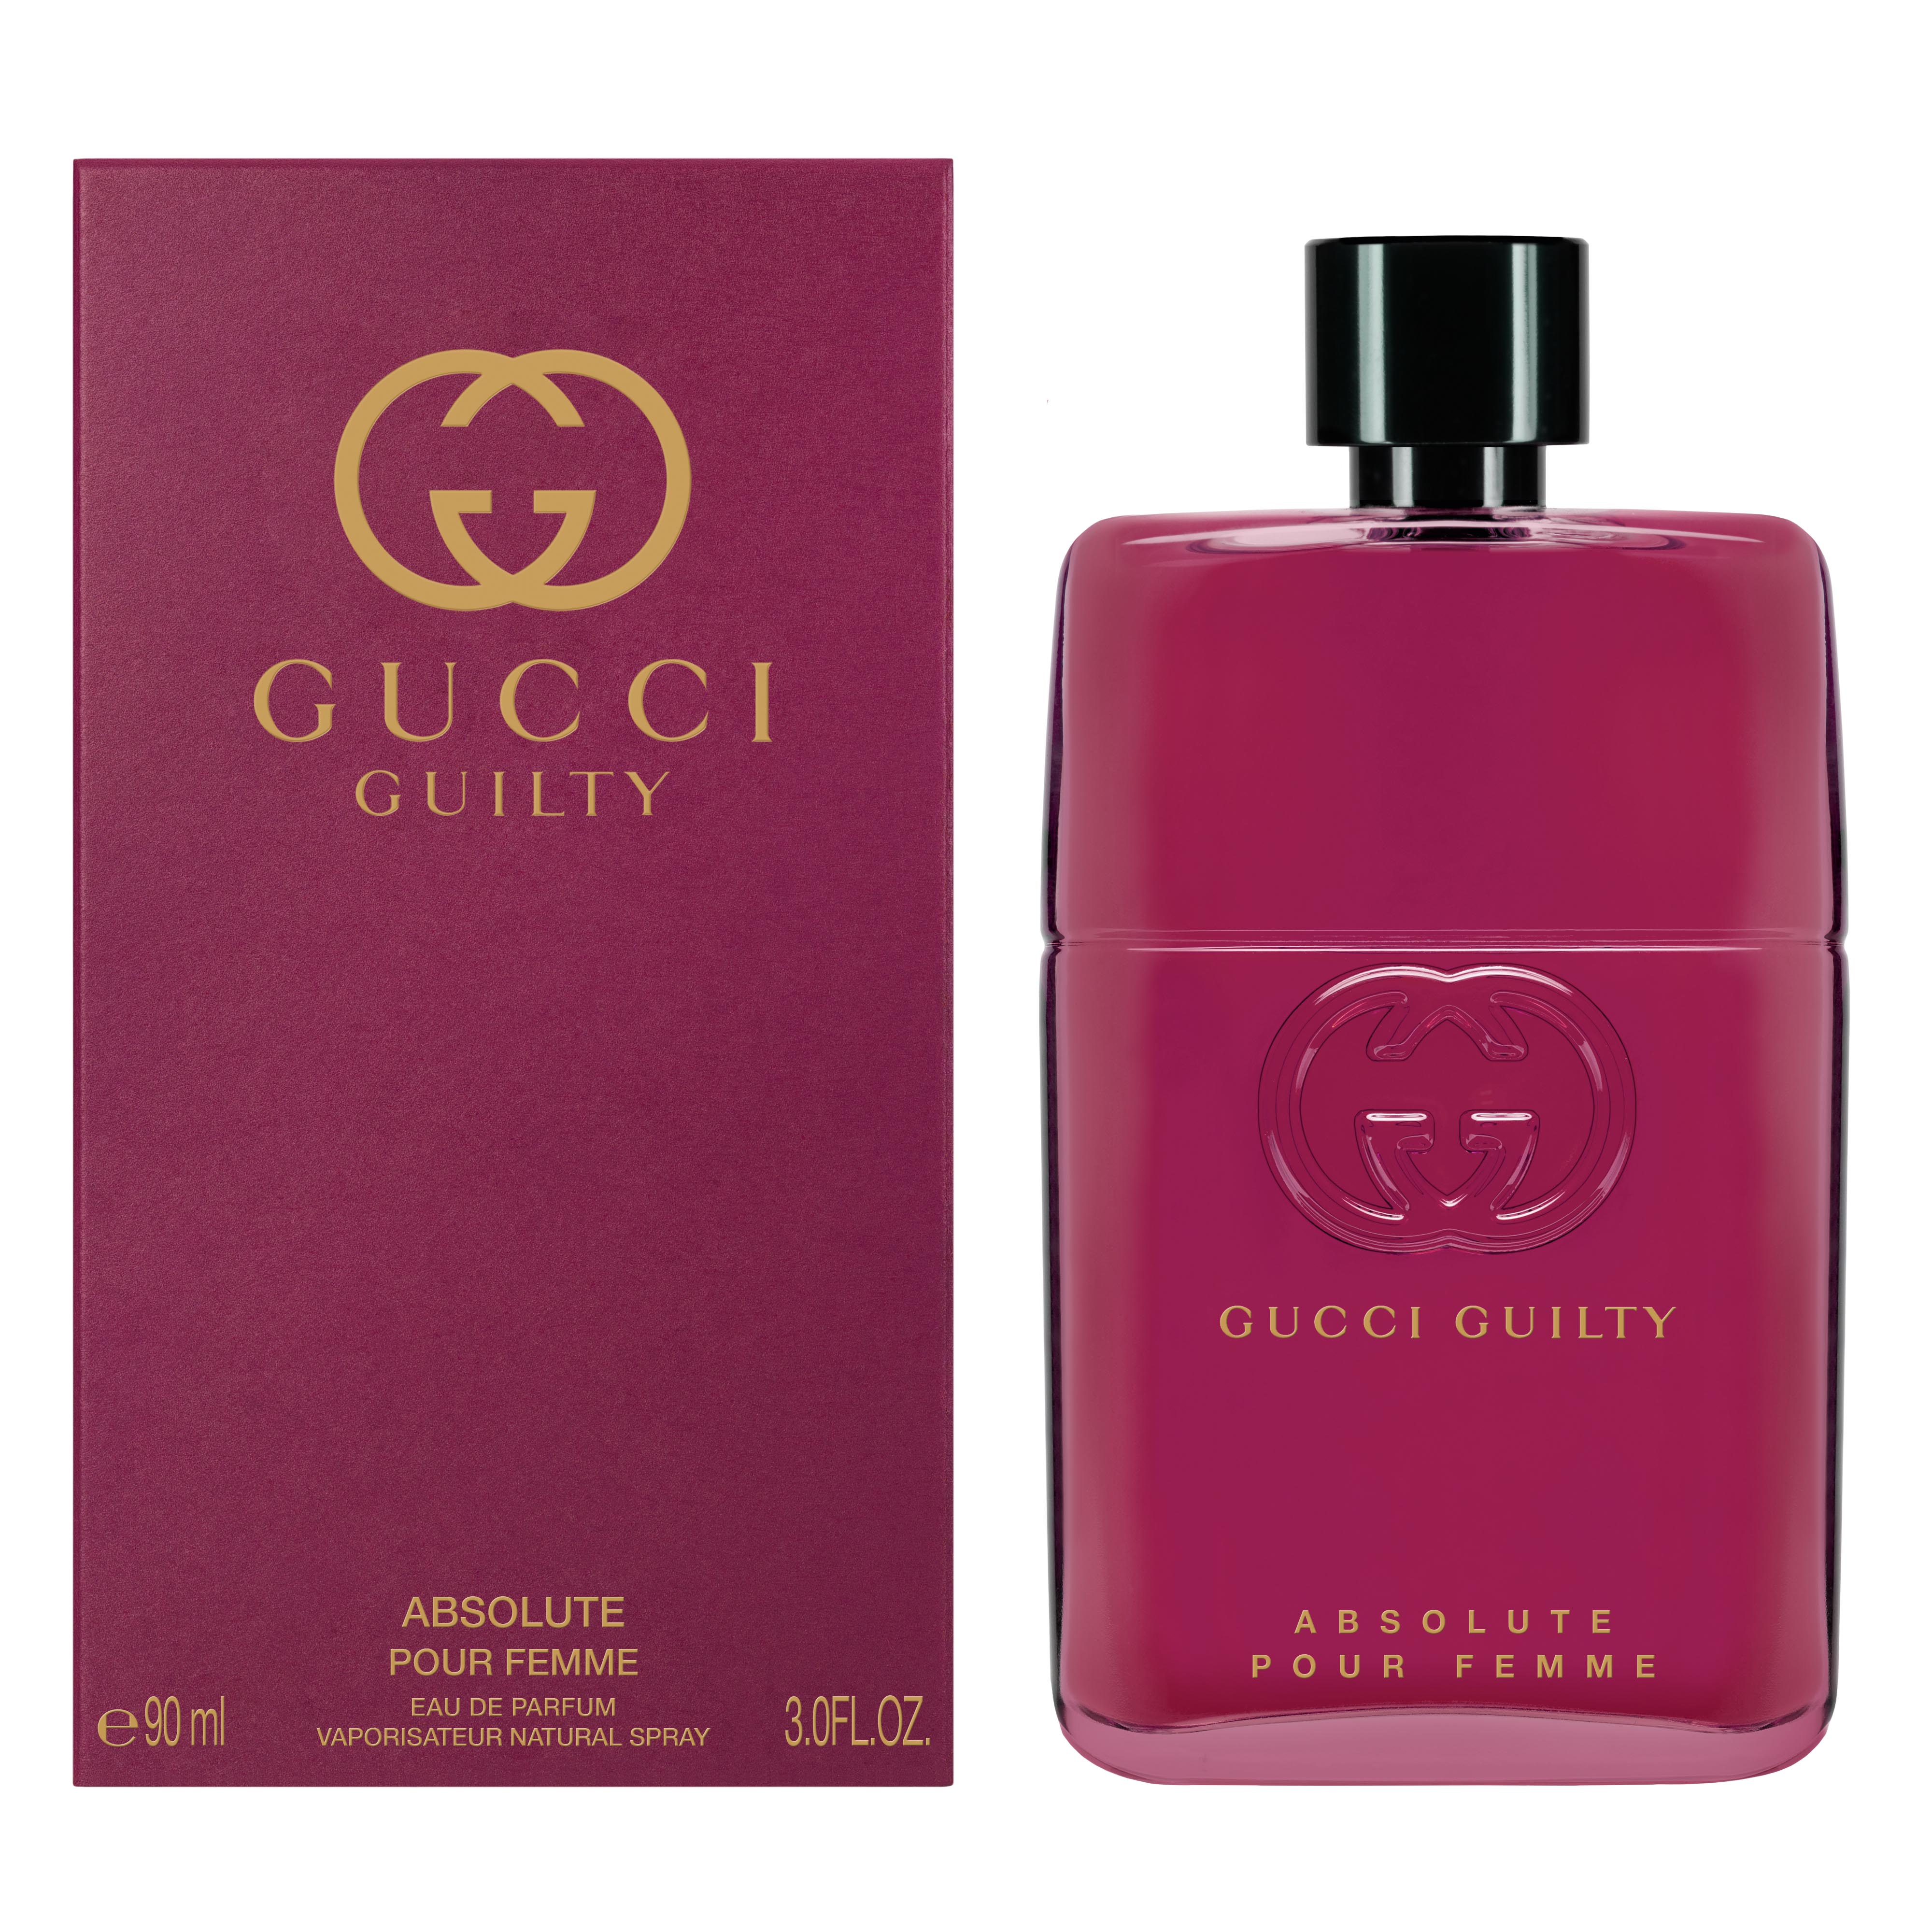 Туалетная вода gucci guilty. Gucci guilty absolute pour femme EDP 50ml. Gucci guilty absolute pour femme. Gucci guilty absolute pour homme 50ml. Gucci Gucci guilty absolute pour femme.